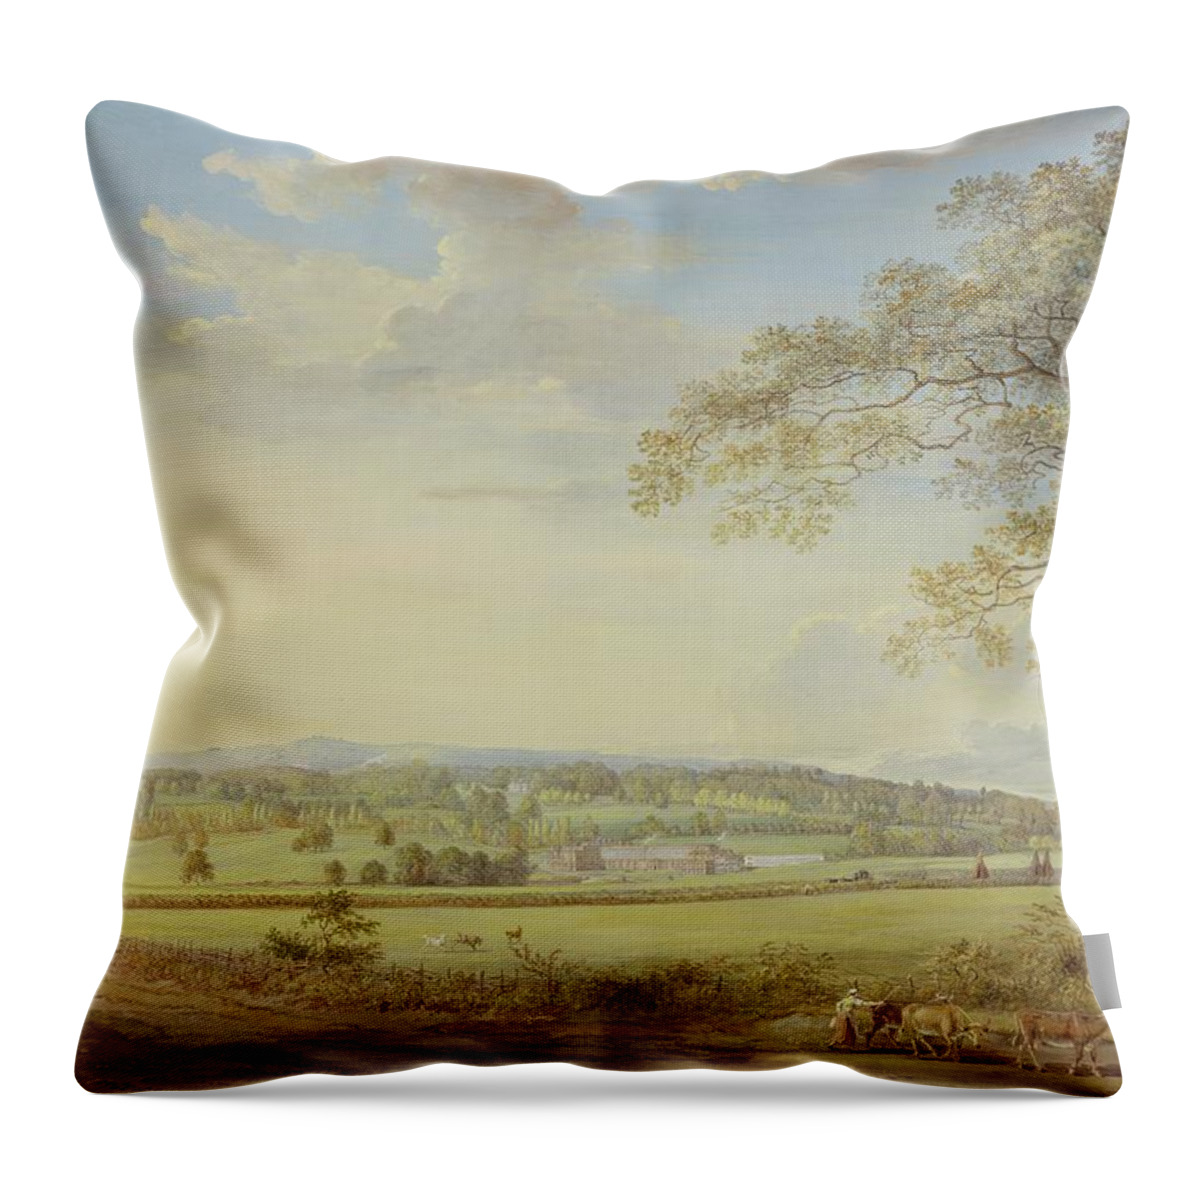 Whatman Throw Pillow featuring the painting Whatman Turkey Mill in Kent by Paul Sandby